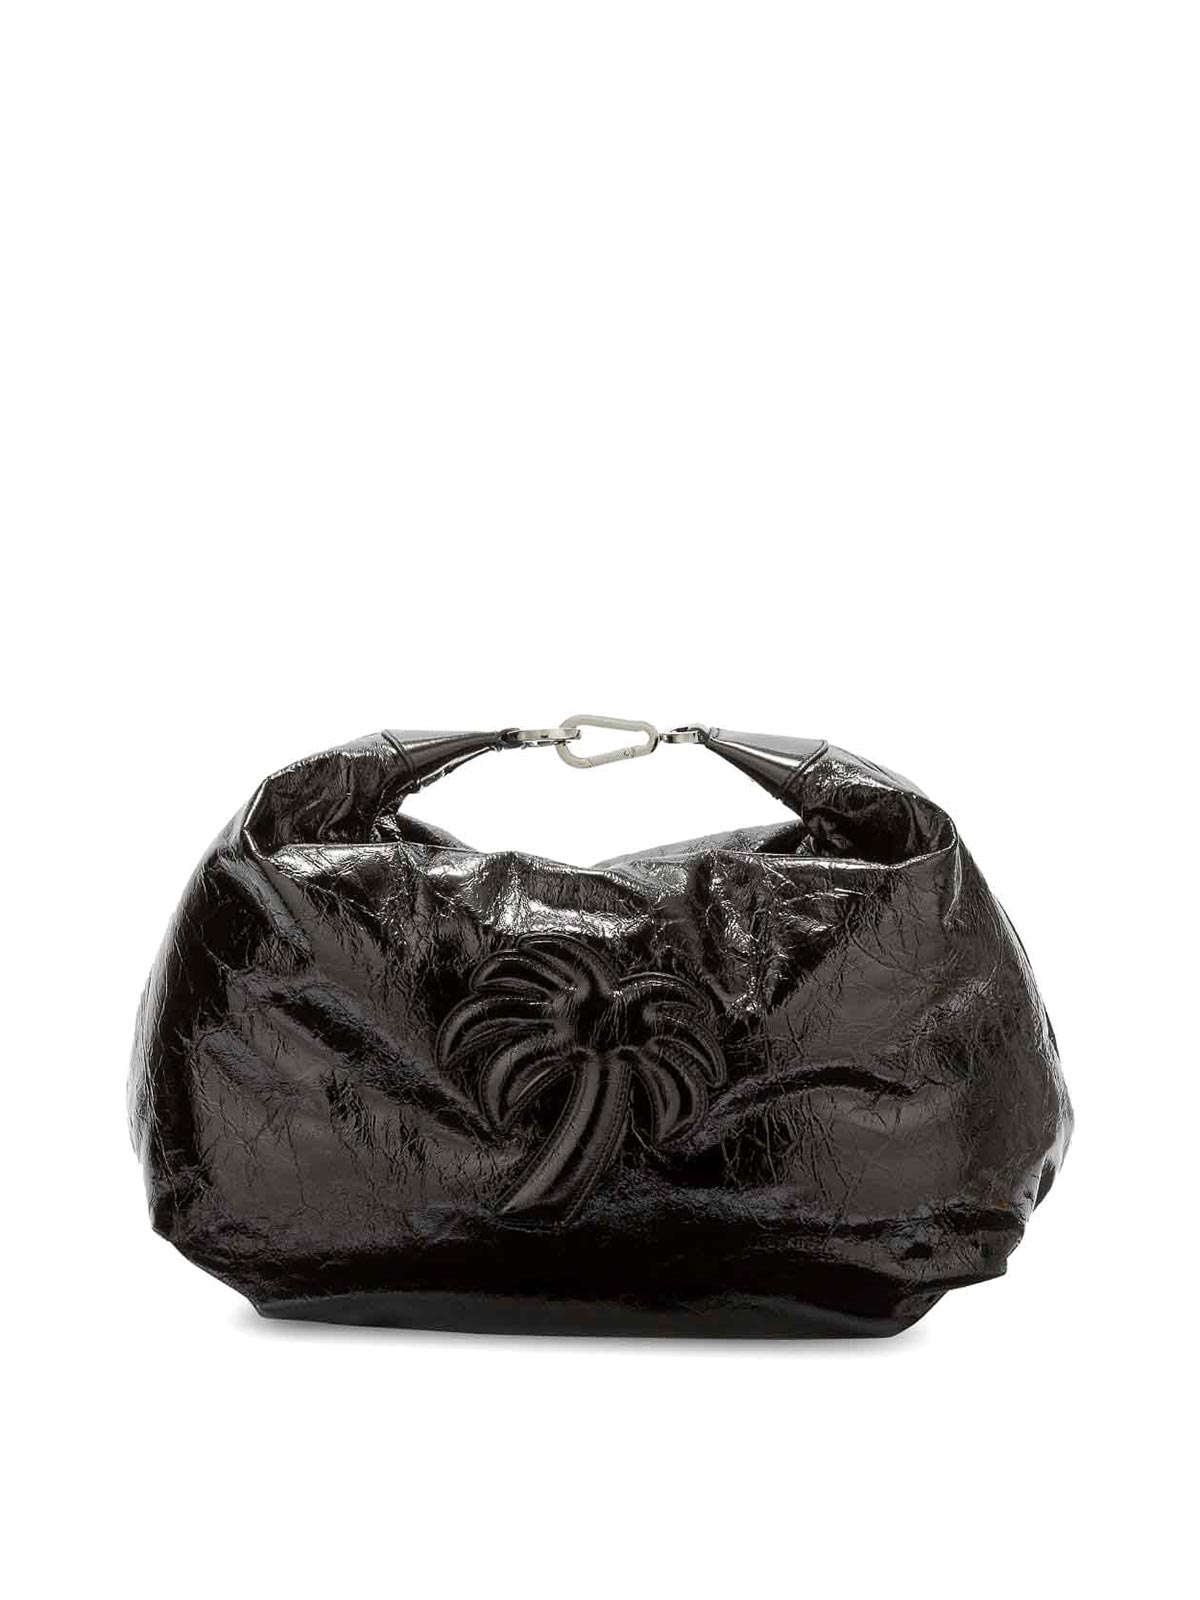 Palm Angels Palm-motif Leather Hobo Bag In Black